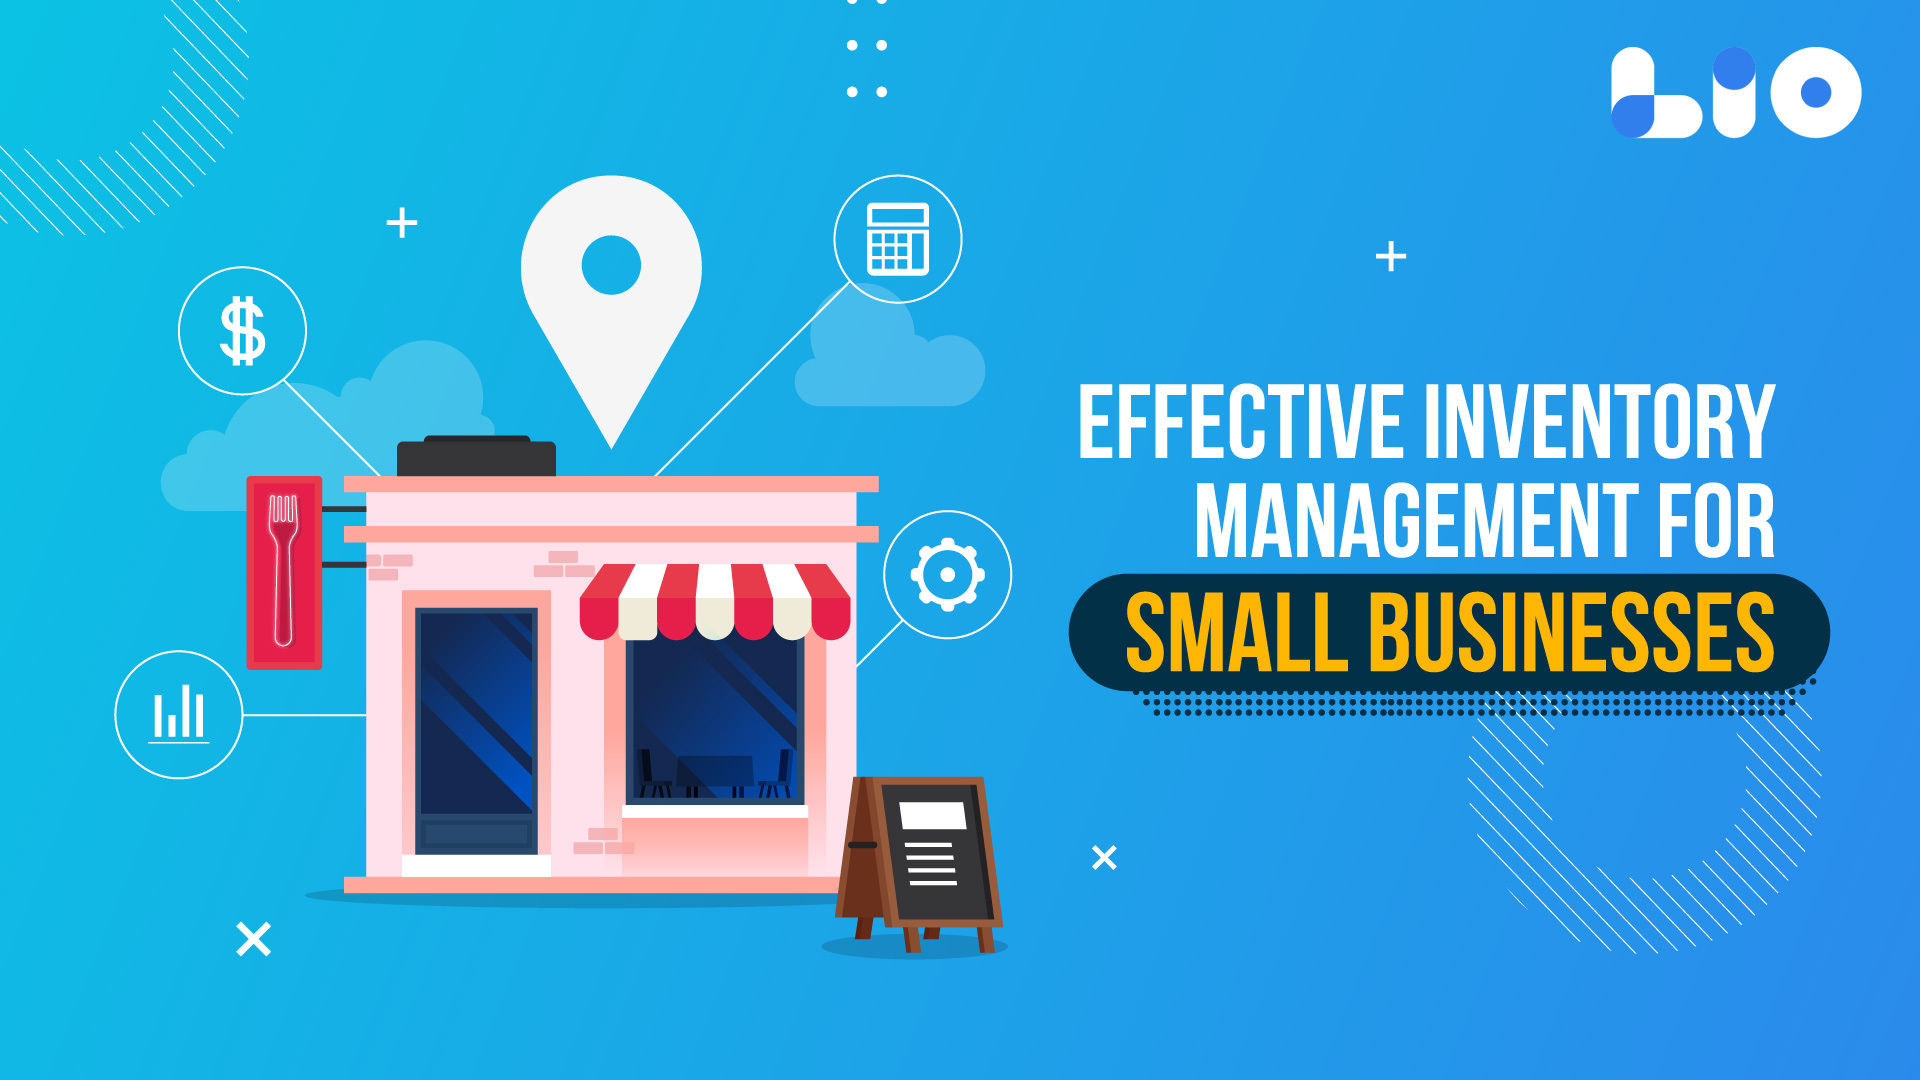 Effective Inventory Management for Small Businesses